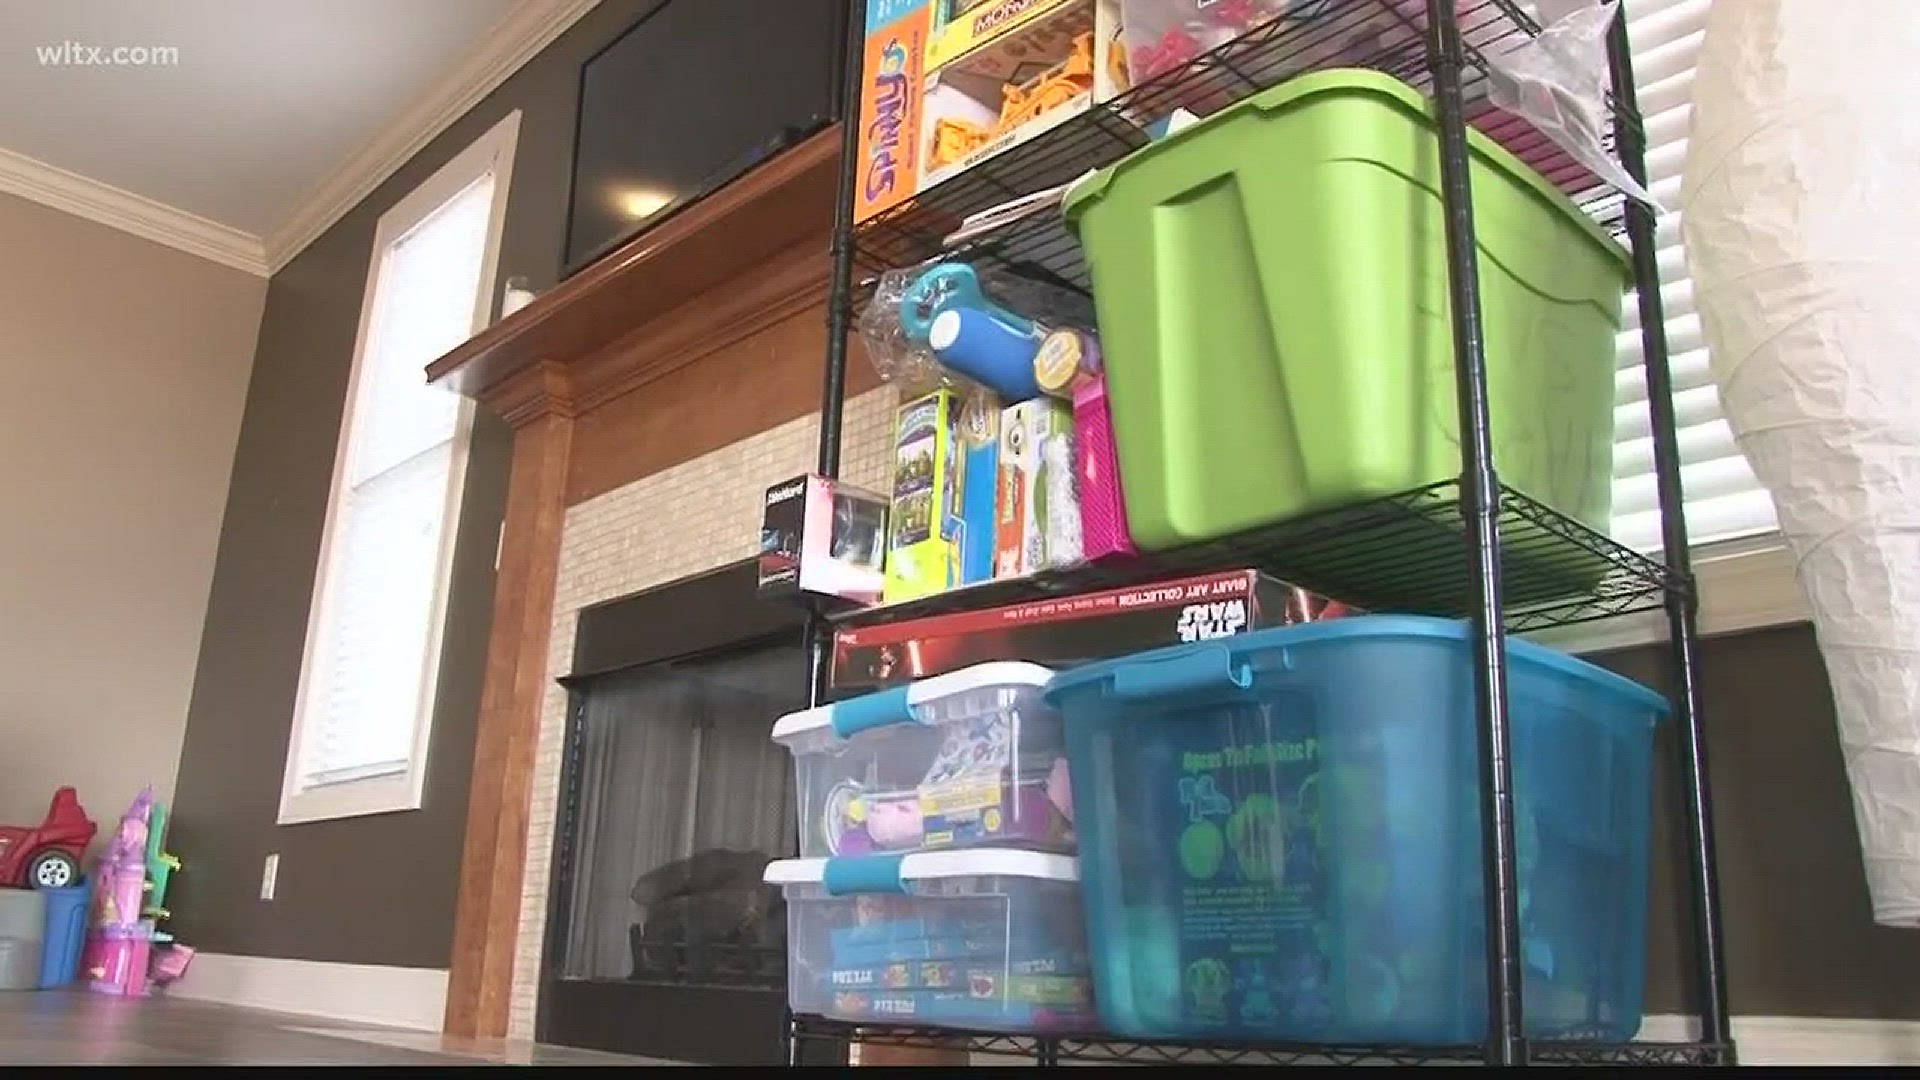 With the Birthday Box, Madison collects toy donations, wraps them, and takes them to shelters for kids who may not have had a birthday present.